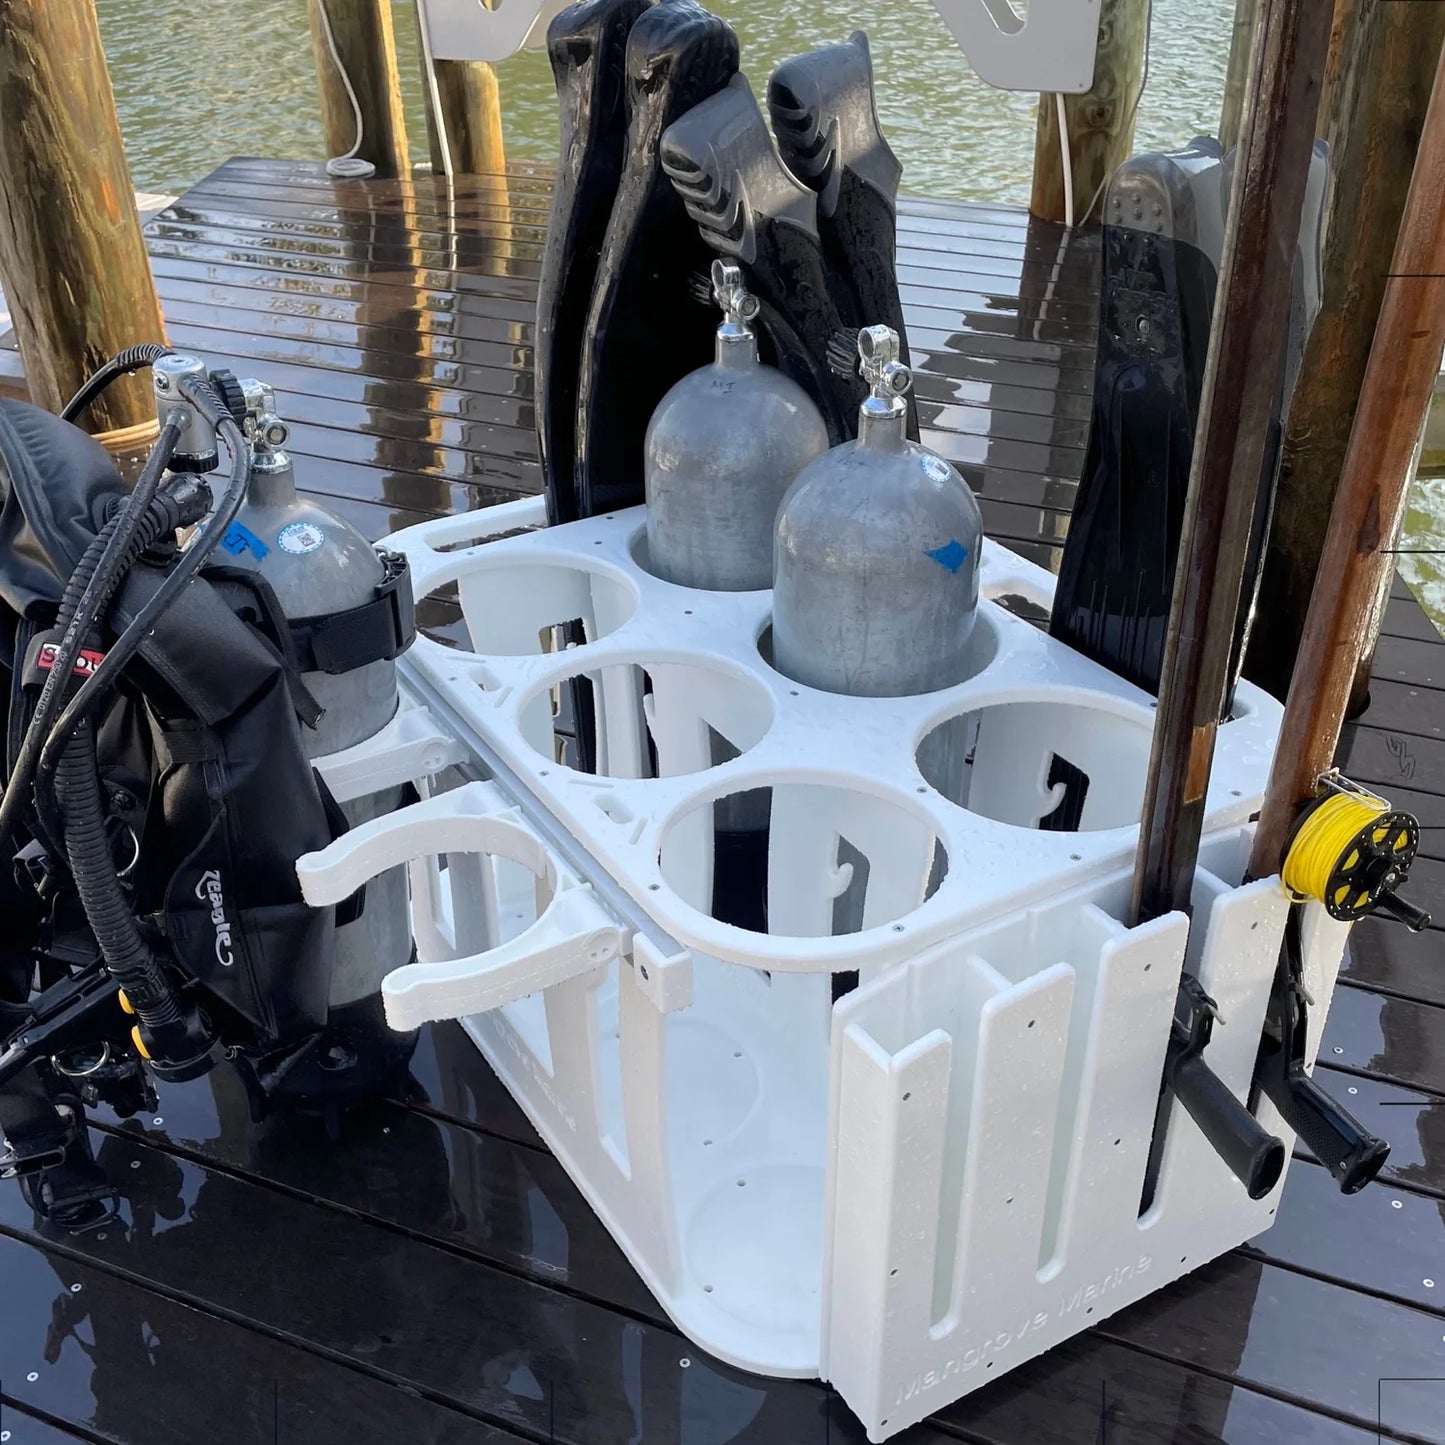 Keep your dive gear safe and secure with Mangrove Marine's Scuba Tank Rack is made by a lifetime diver for divers.   Our precision engineering  and quality materials offer the  long term value and quality you demand for your marine life.   King brand Starboard, stainless hardware, featuring 3 optional custom add-ons.  